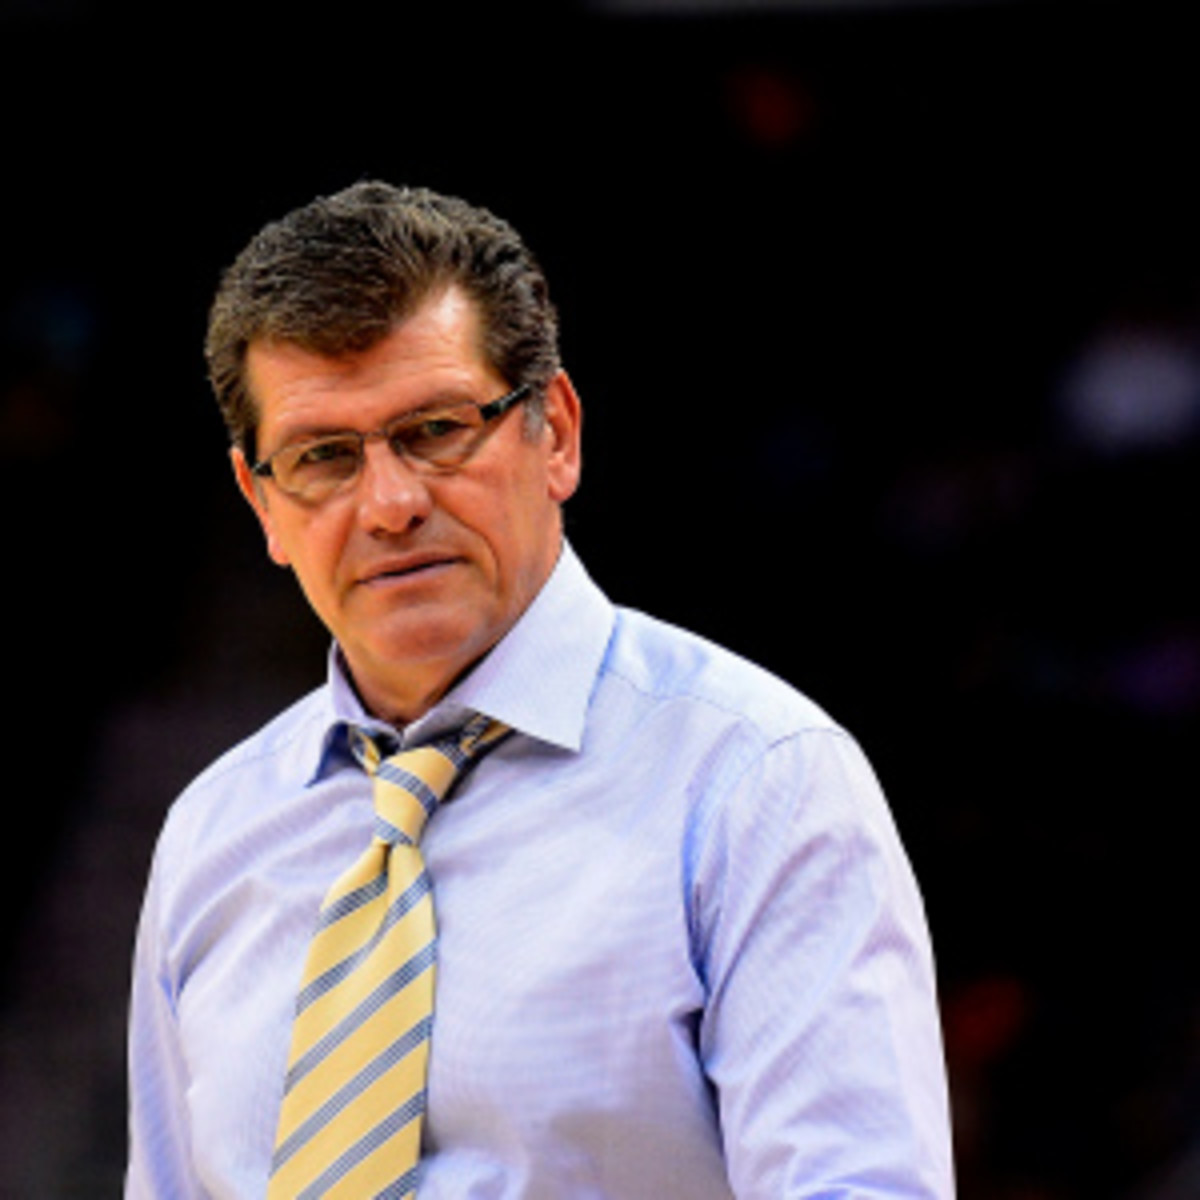 Geno Auriemma had a lawsuit against him tossed out in April. (Stacy Revere/Getty Images)